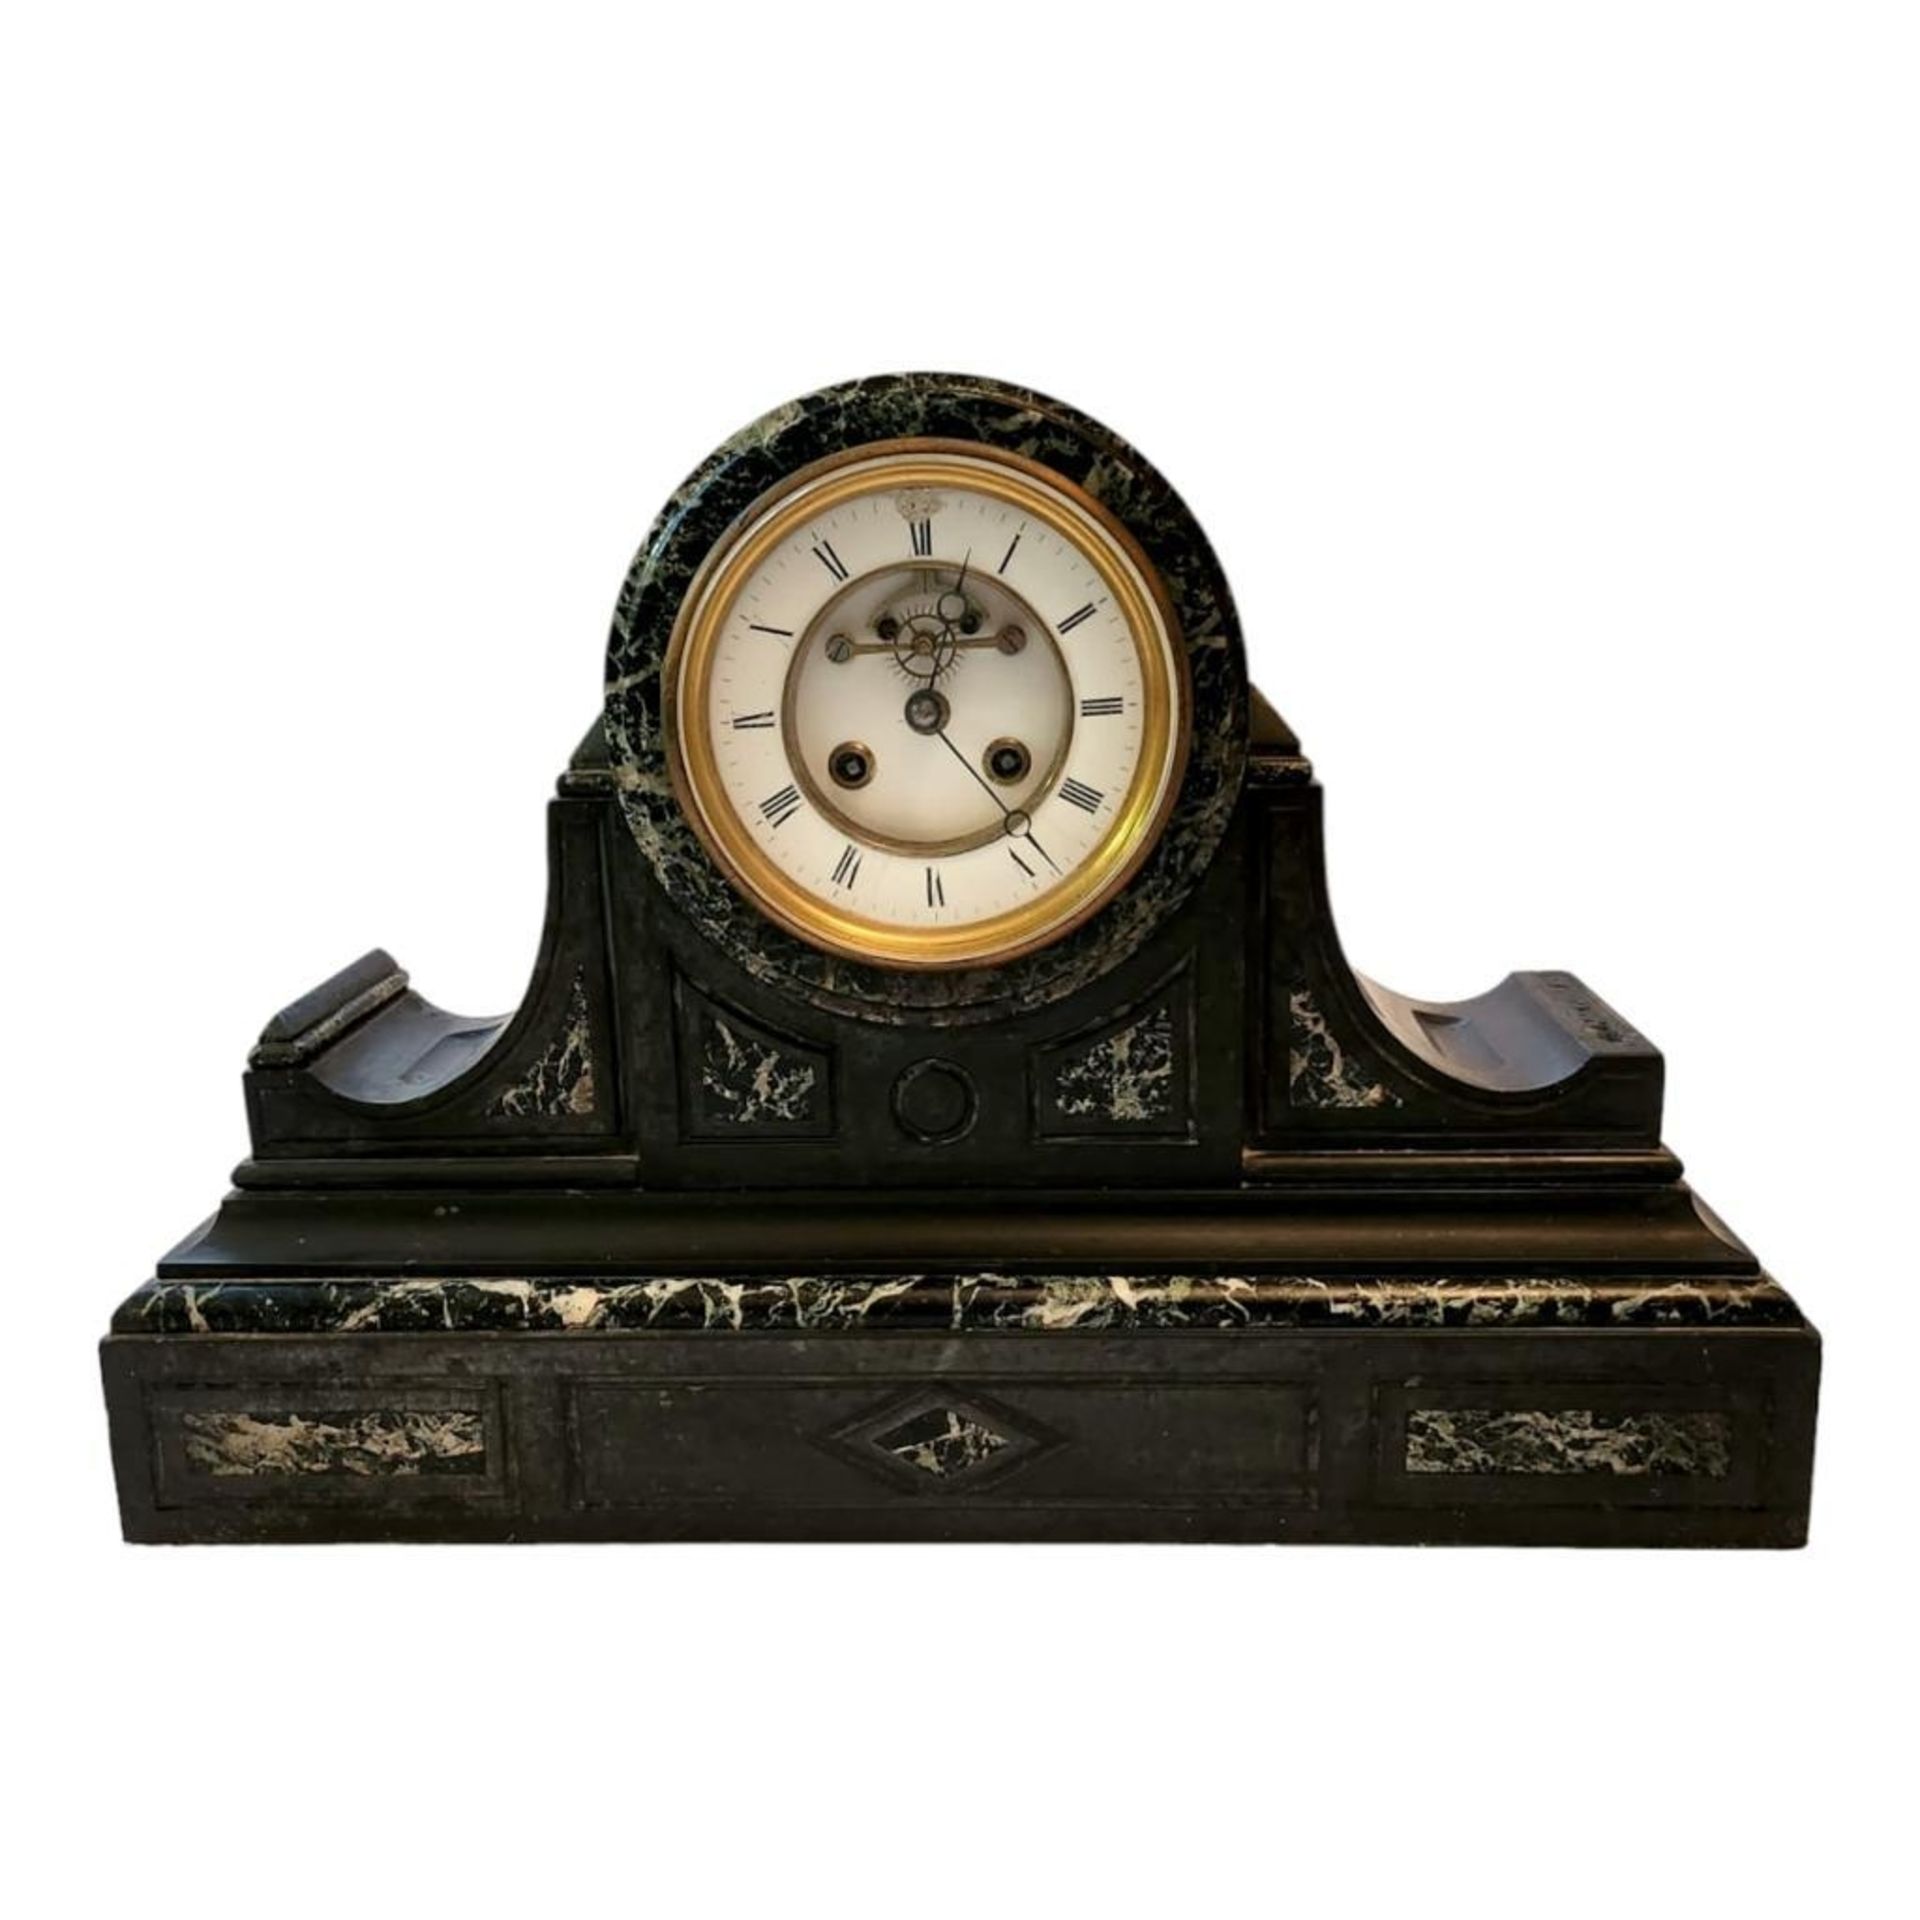 A Victorian Slate Mantel Clock with Eight Day French Bell Strike Movement and Visual Escapement. - Image 2 of 13